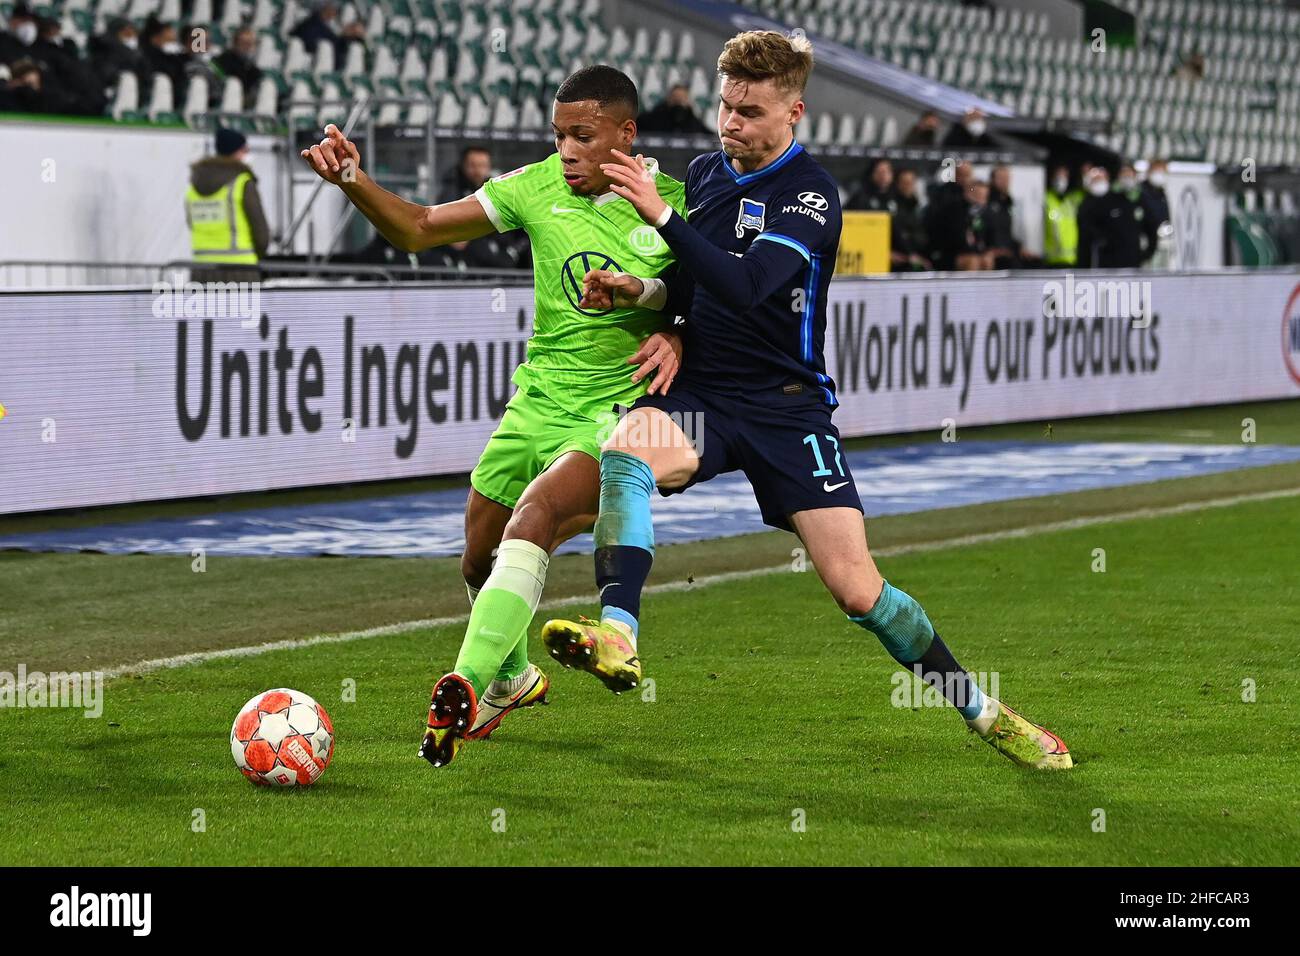 Wolfsburg, Germany. 15th Jan, 2022. Soccer: Bundesliga, VfL Wolfsburg - Hertha BSC, Matchday 19 at Volkswagen Arena. Wolfsburg's Aster Vranckx (l) plays against Berlin's Maximilian Mittelstädt. Credit: Swen Pförtner/dpa - IMPORTANT NOTE: In accordance with the requirements of the DFL Deutsche Fußball Liga and the DFB Deutscher Fußball-Bund, it is prohibited to use or have used photographs taken in the stadium and/or of the match in the form of sequence pictures and/or video-like photo series./dpa/Alamy Live News Stock Photo